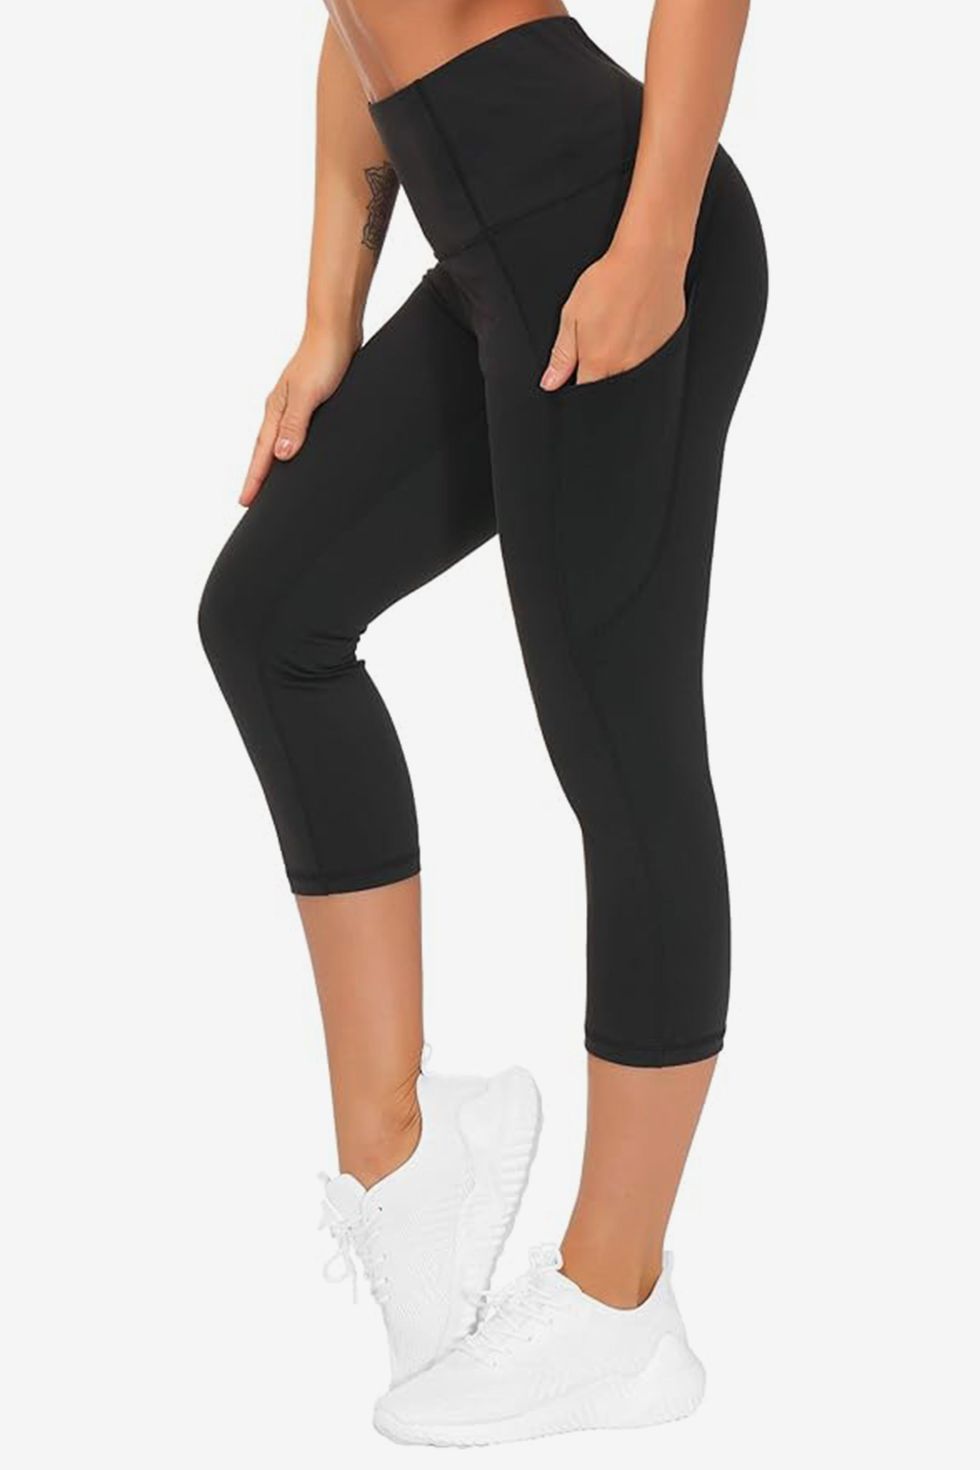 My new go-to leggings! These Sunzel Flare leggings are so soft. They h